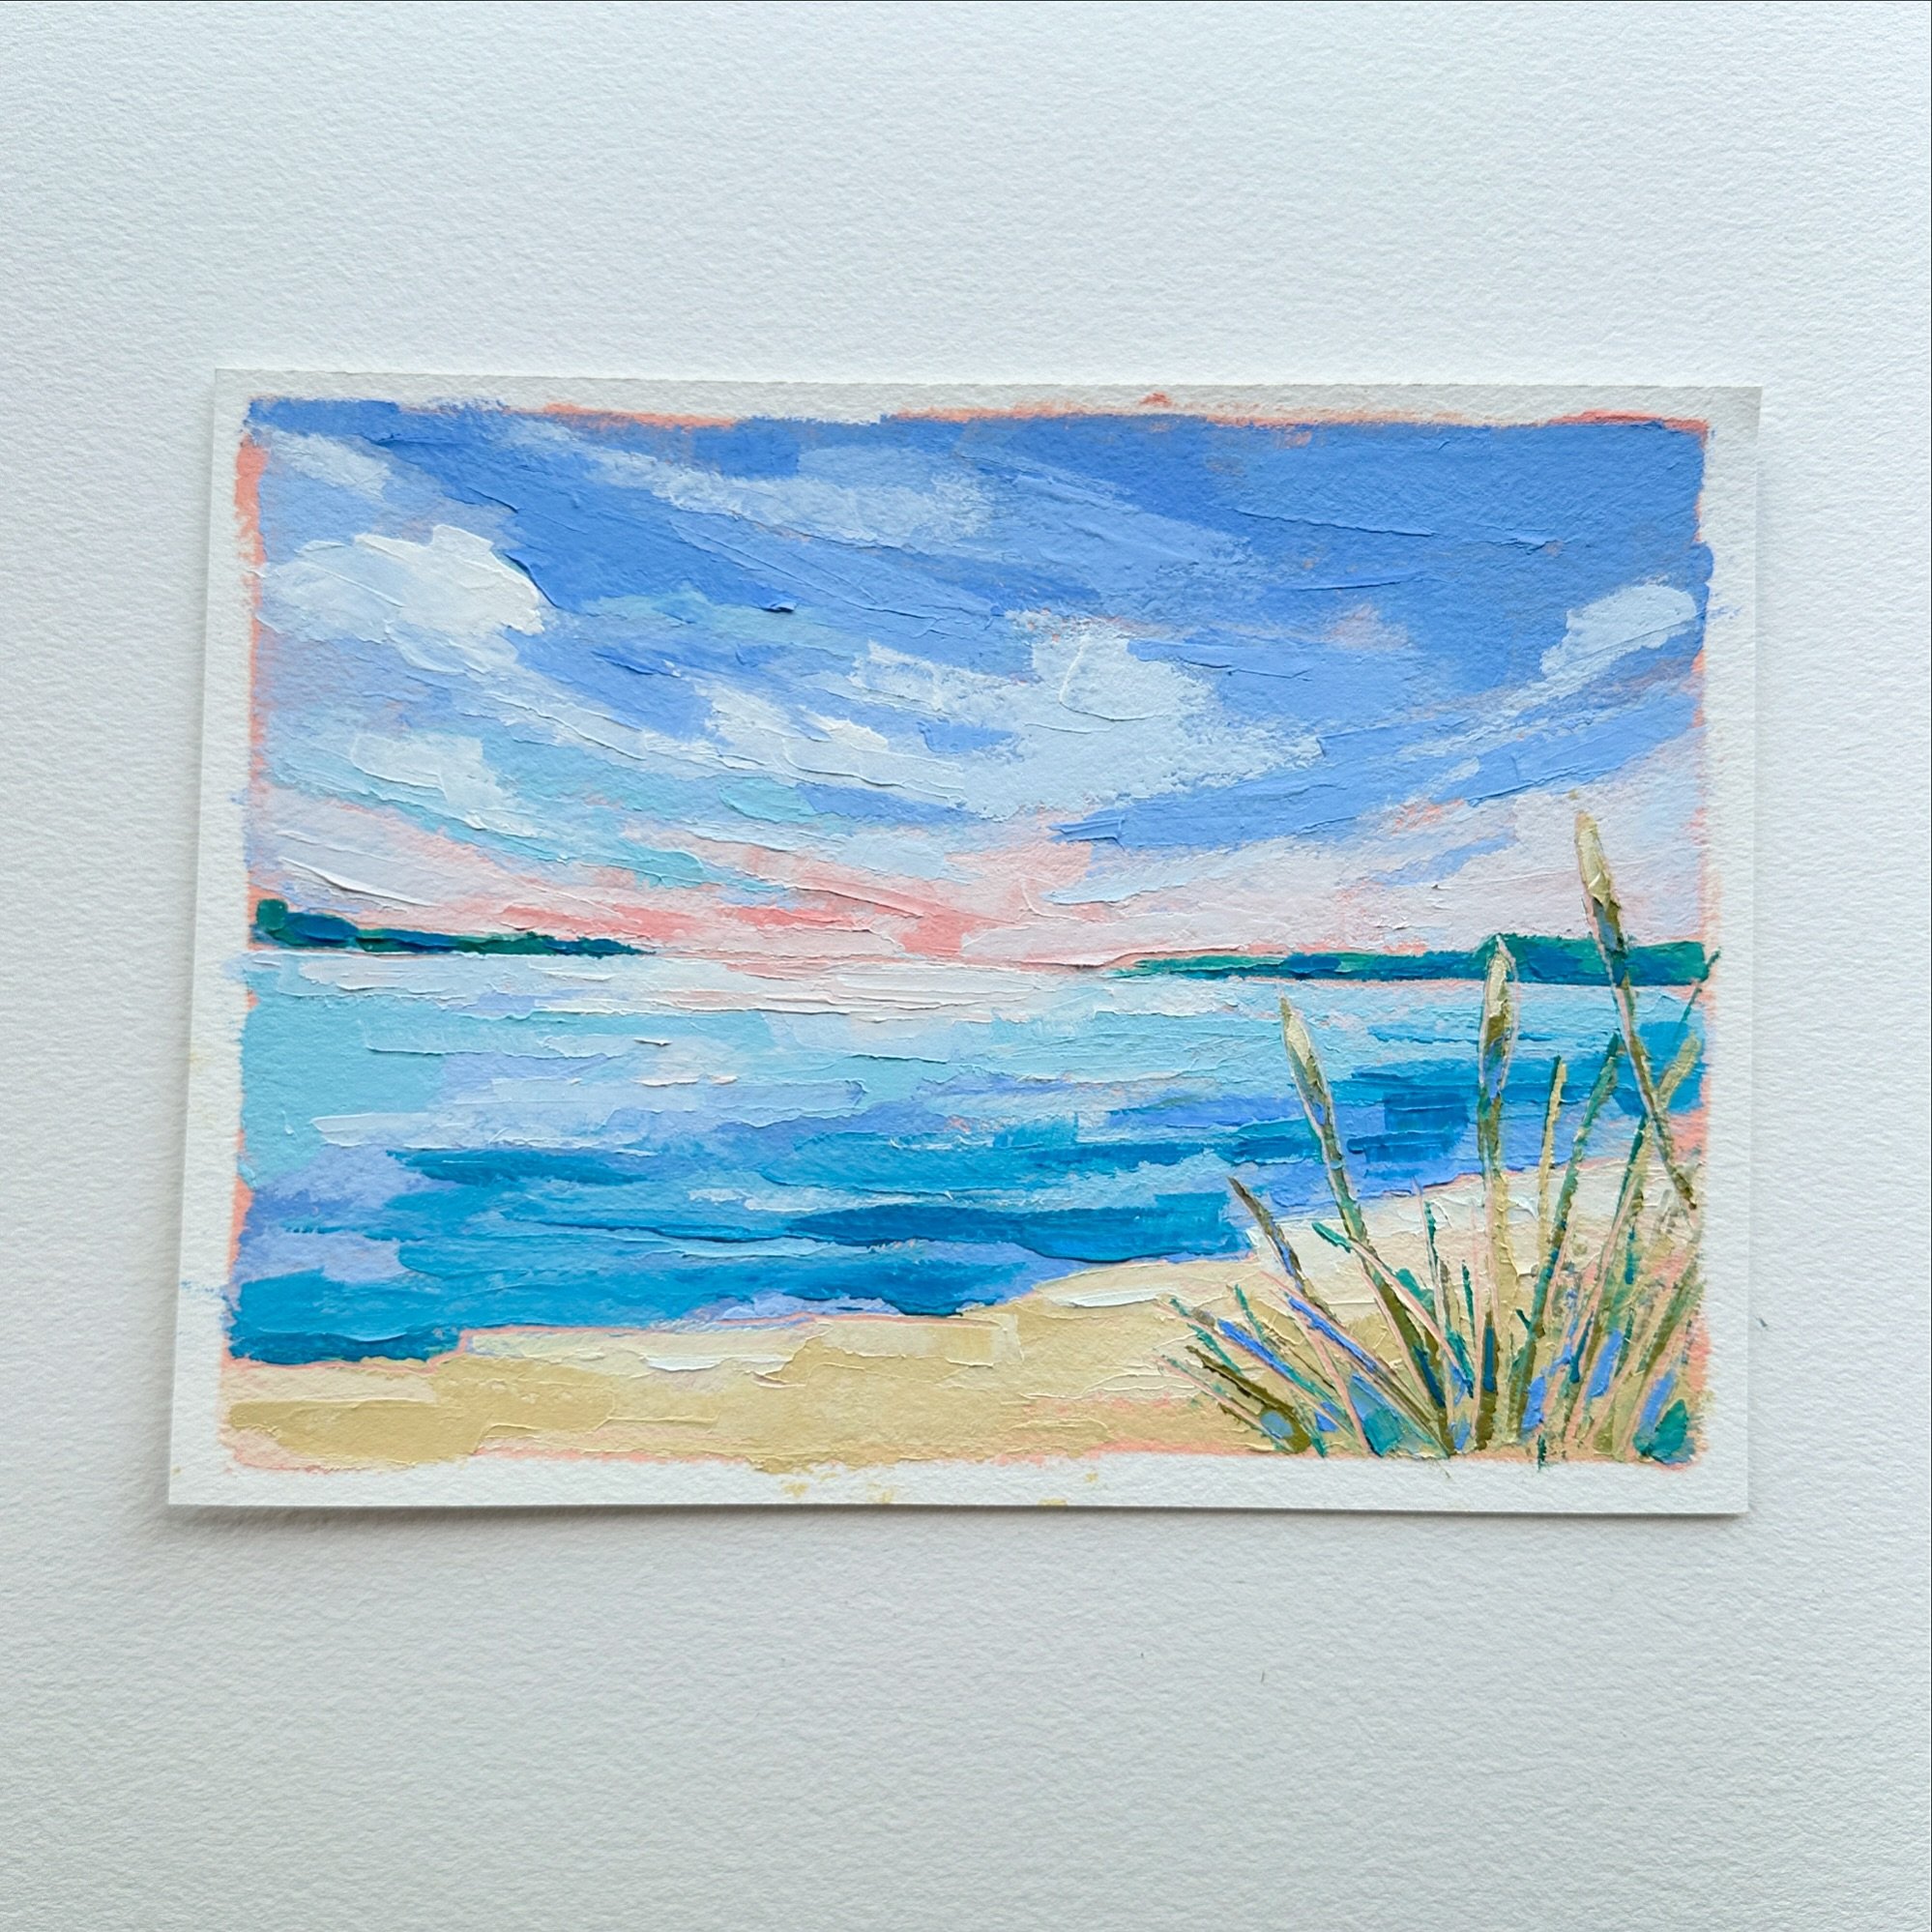 Day 62, The 100 Day Project 2024 @dothe100dayproject

Bohemian Beach. A small study for a bigger piece inspired by this popular beach of M-22 between Glen Arbor and Leland, Michigan. For days 61-70 of my 100 Day Project, I&rsquo;ll be painting little